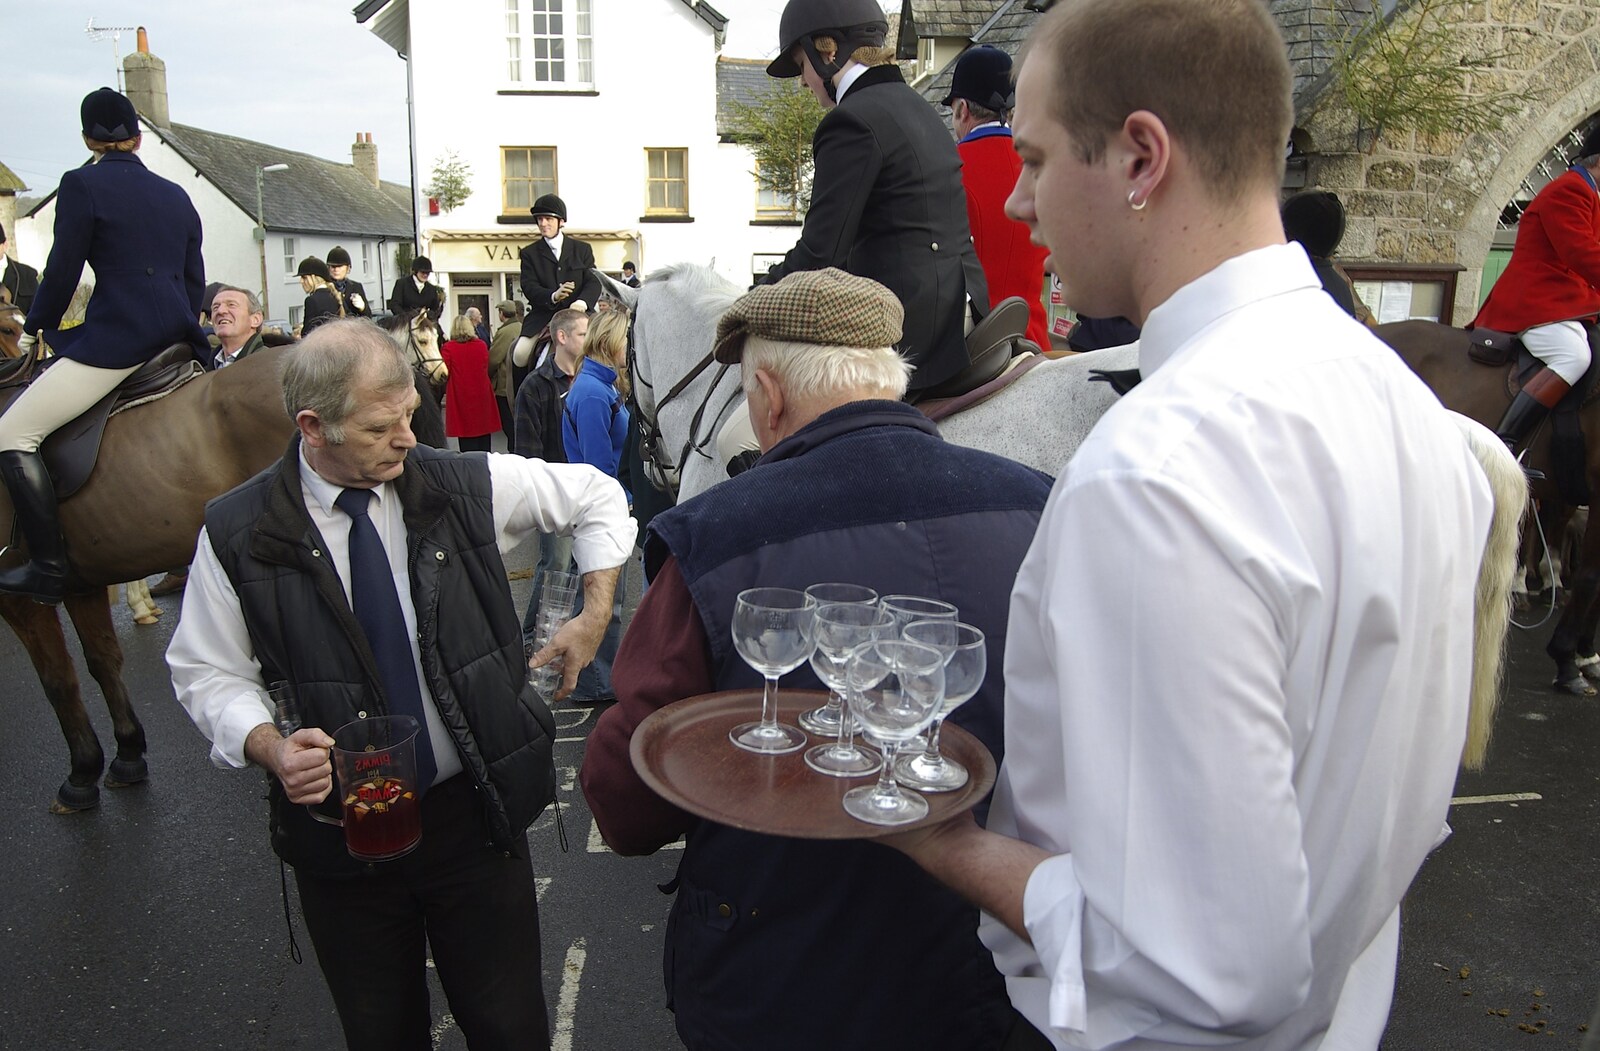 A barman collects glasses from A Boxing Day Hunt, Chagford, Devon - 26th December 2007